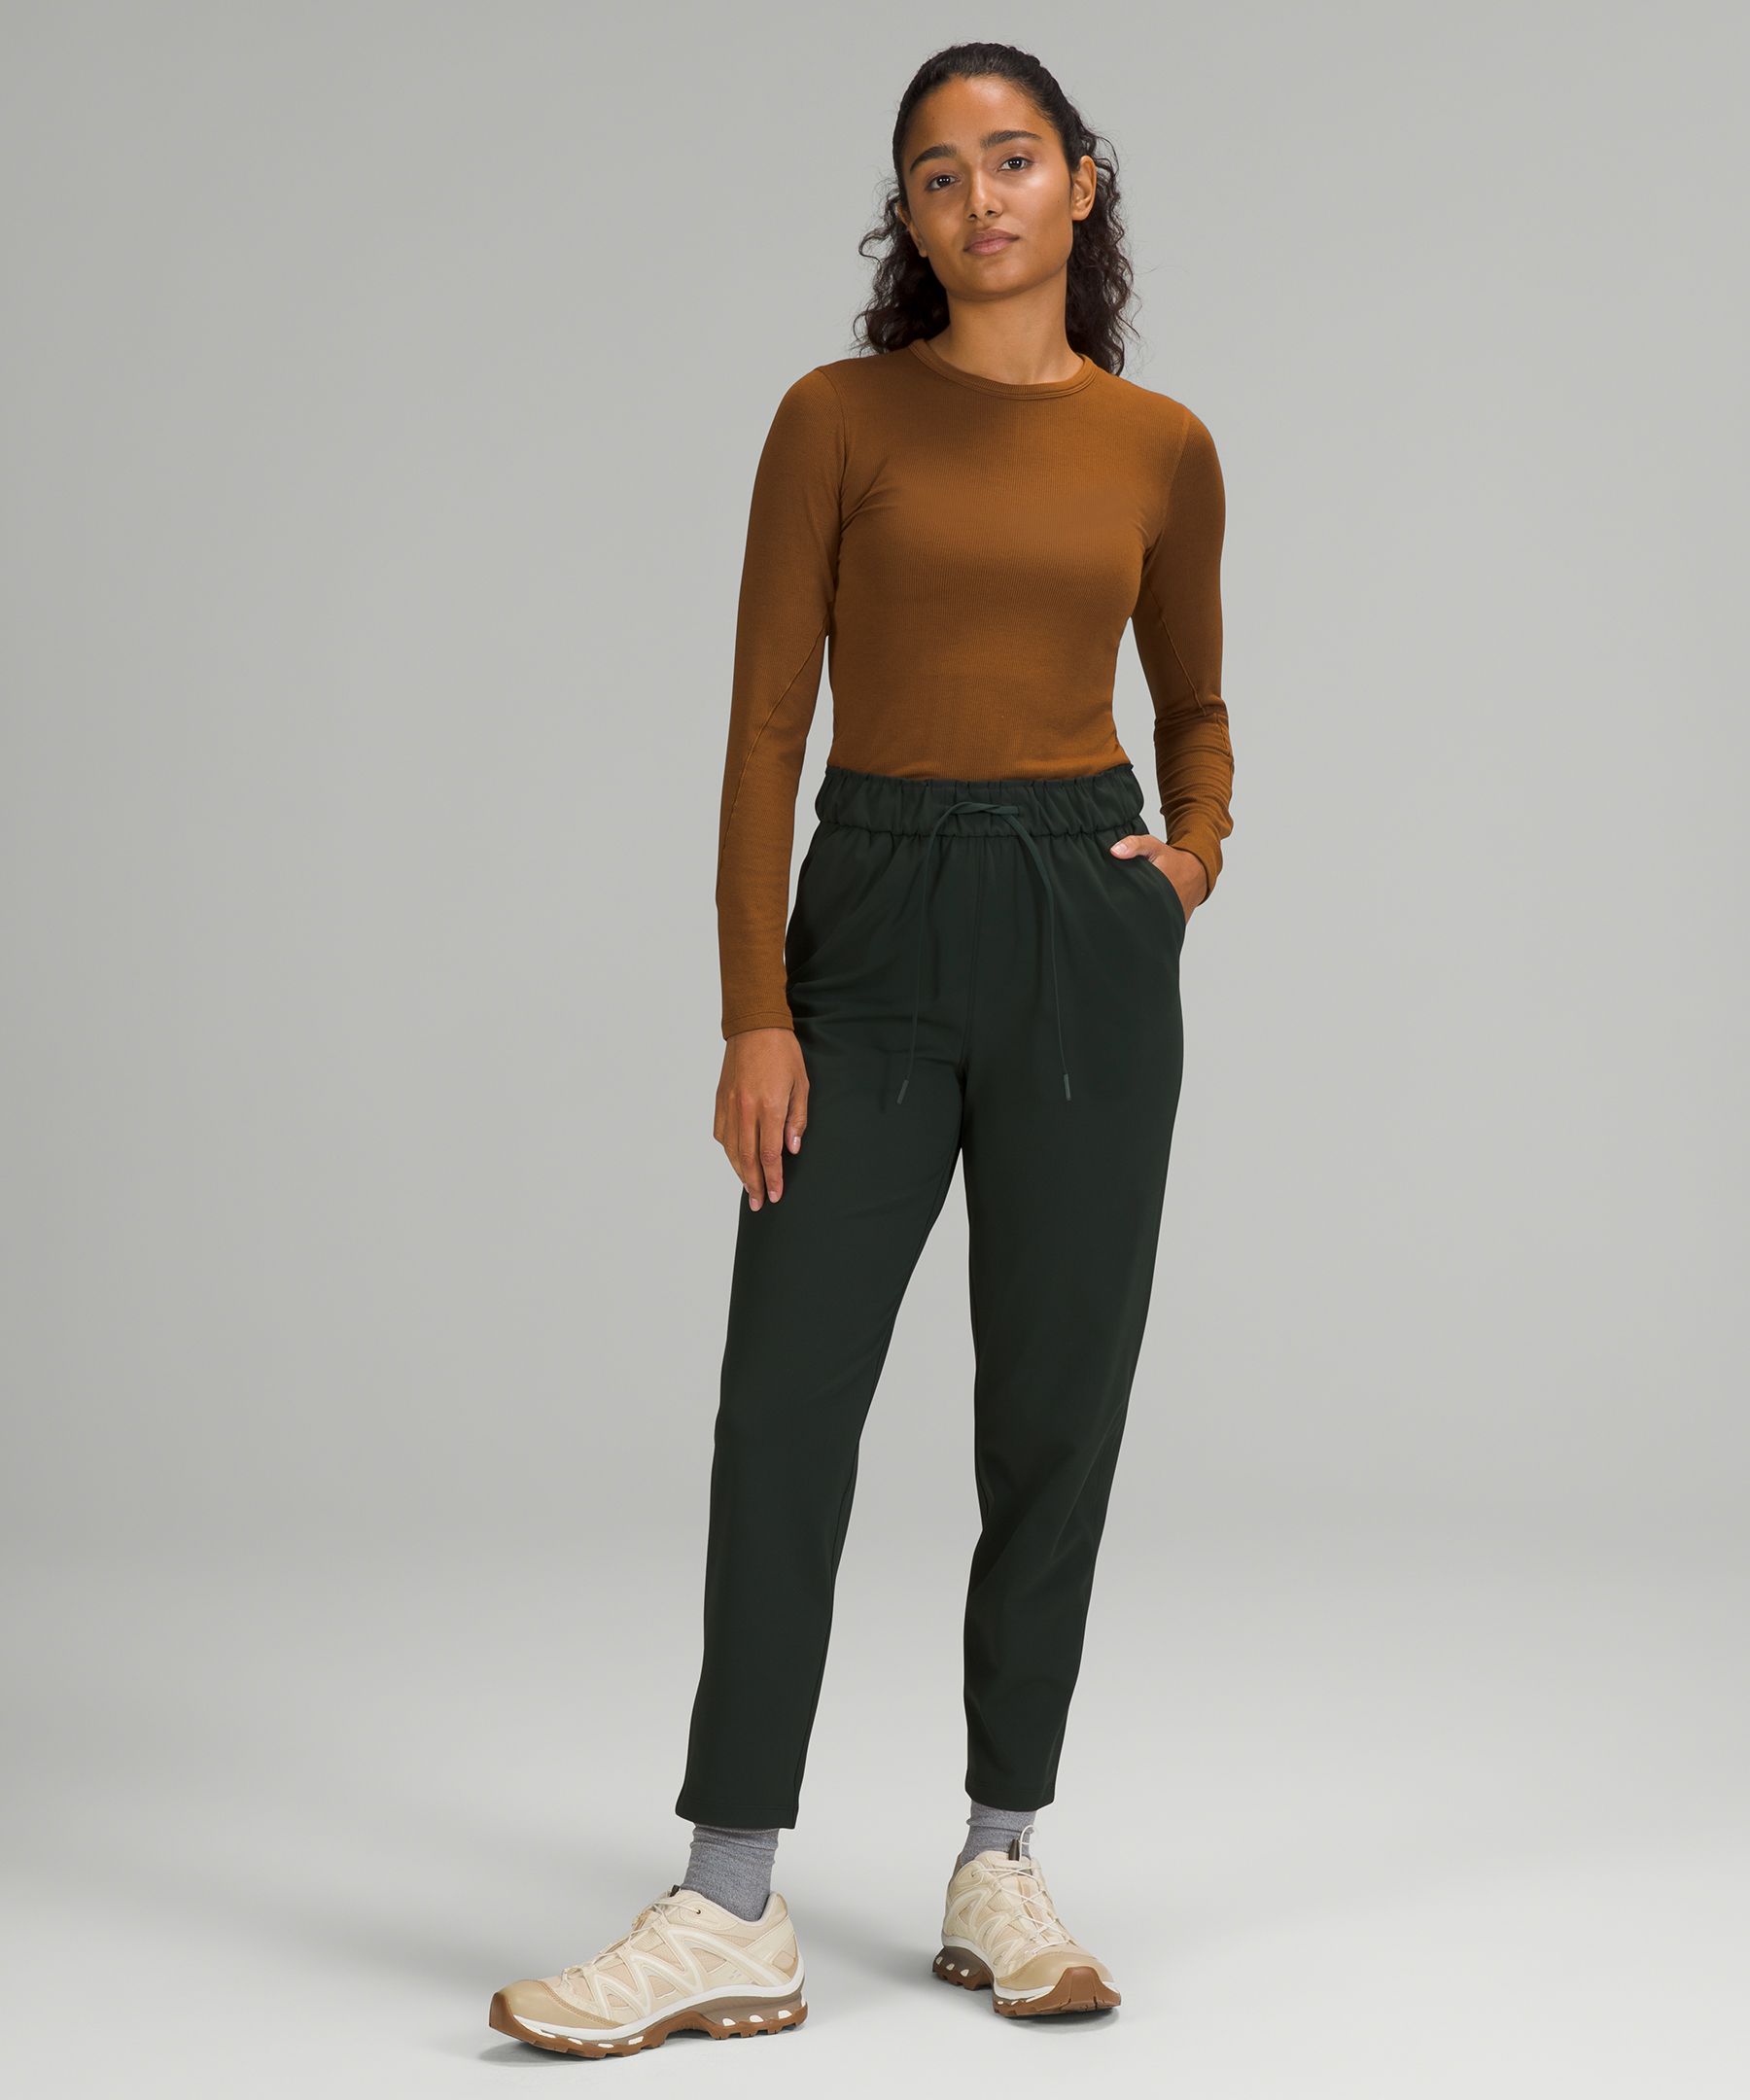 Stretch High-Rise Pant 7/8 Length, Trousers